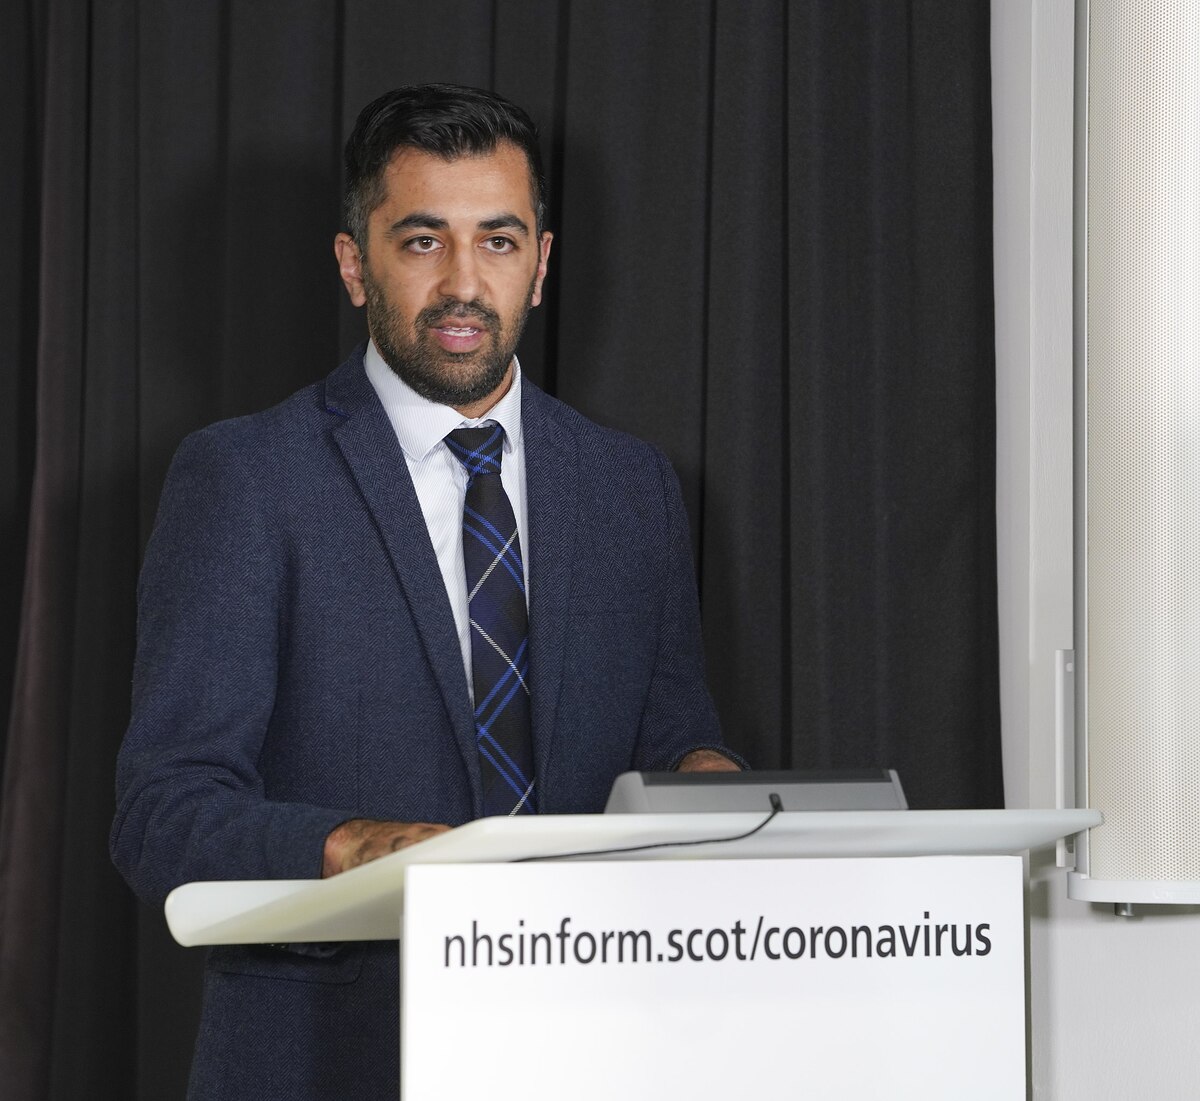 Humza Yousaf elected as sixth First Minister